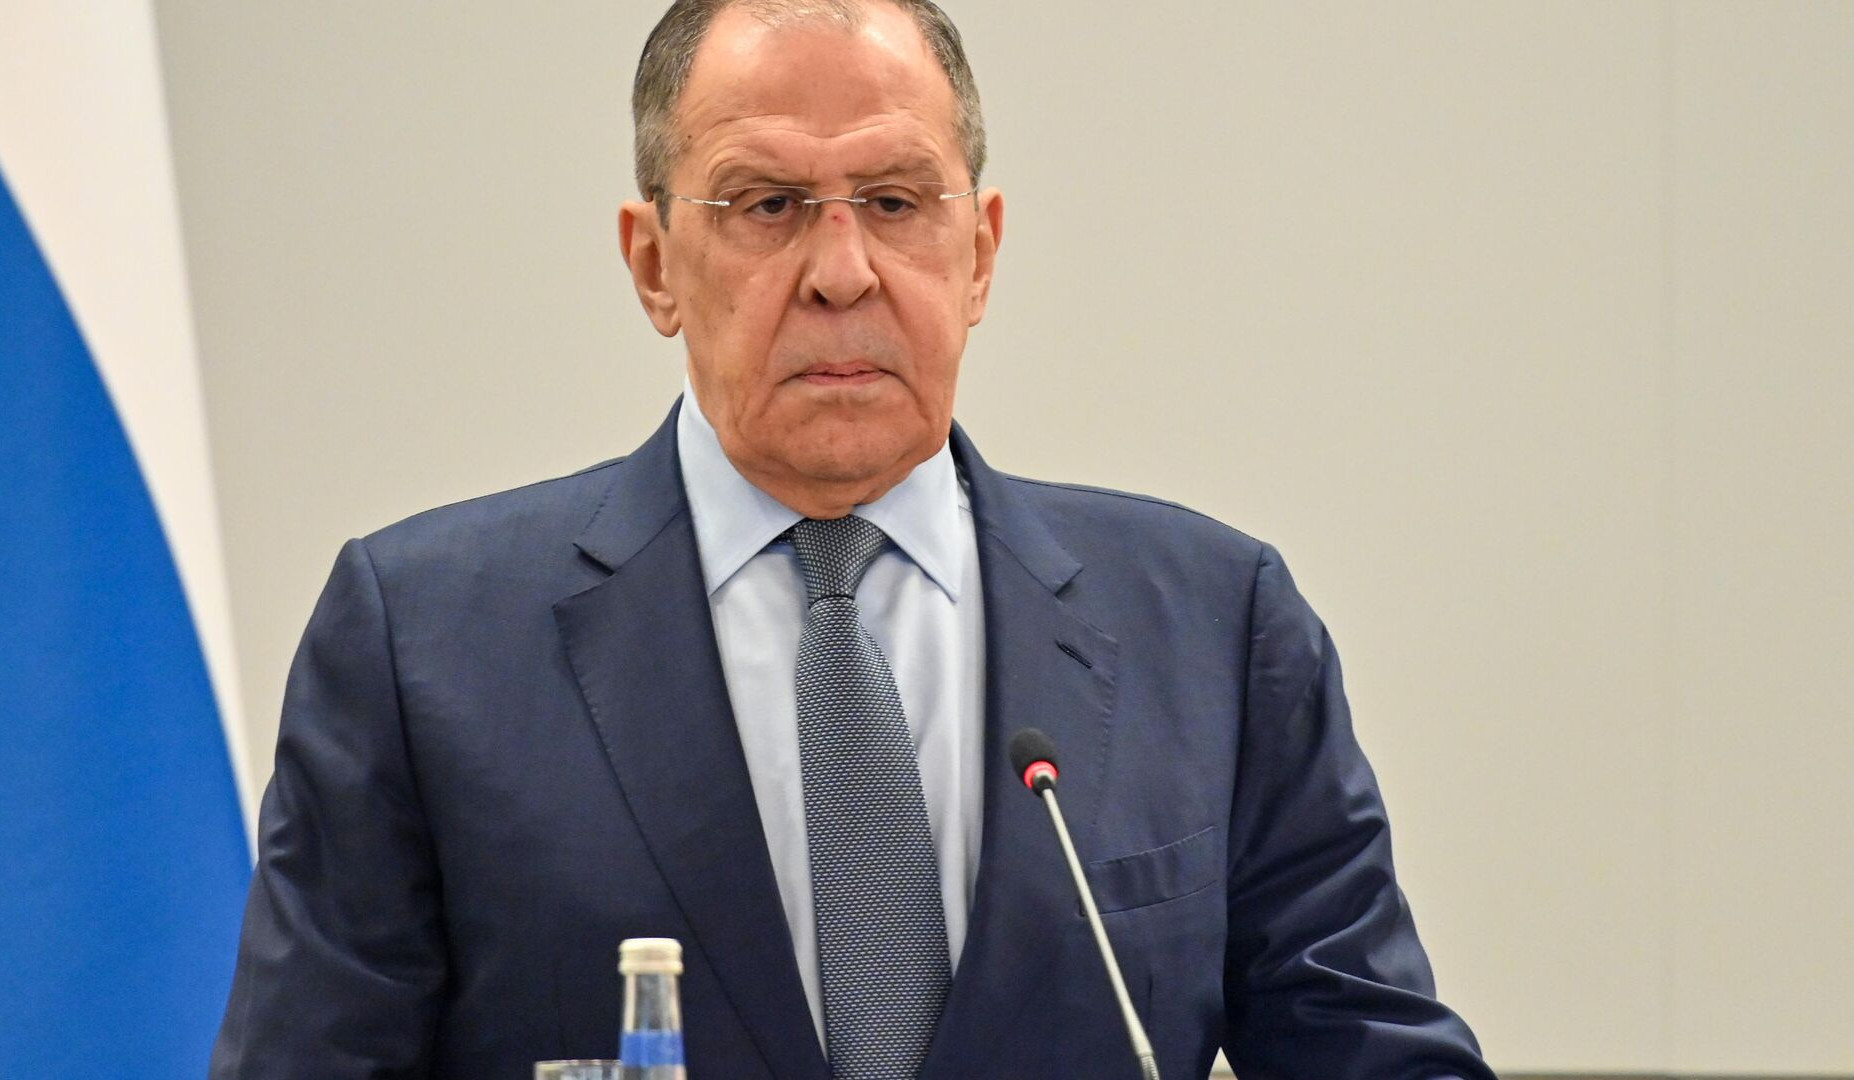 The operation of the Lachin Corridor should be in accordance with the trilateral agreement of November 9, 2020, Lavrov